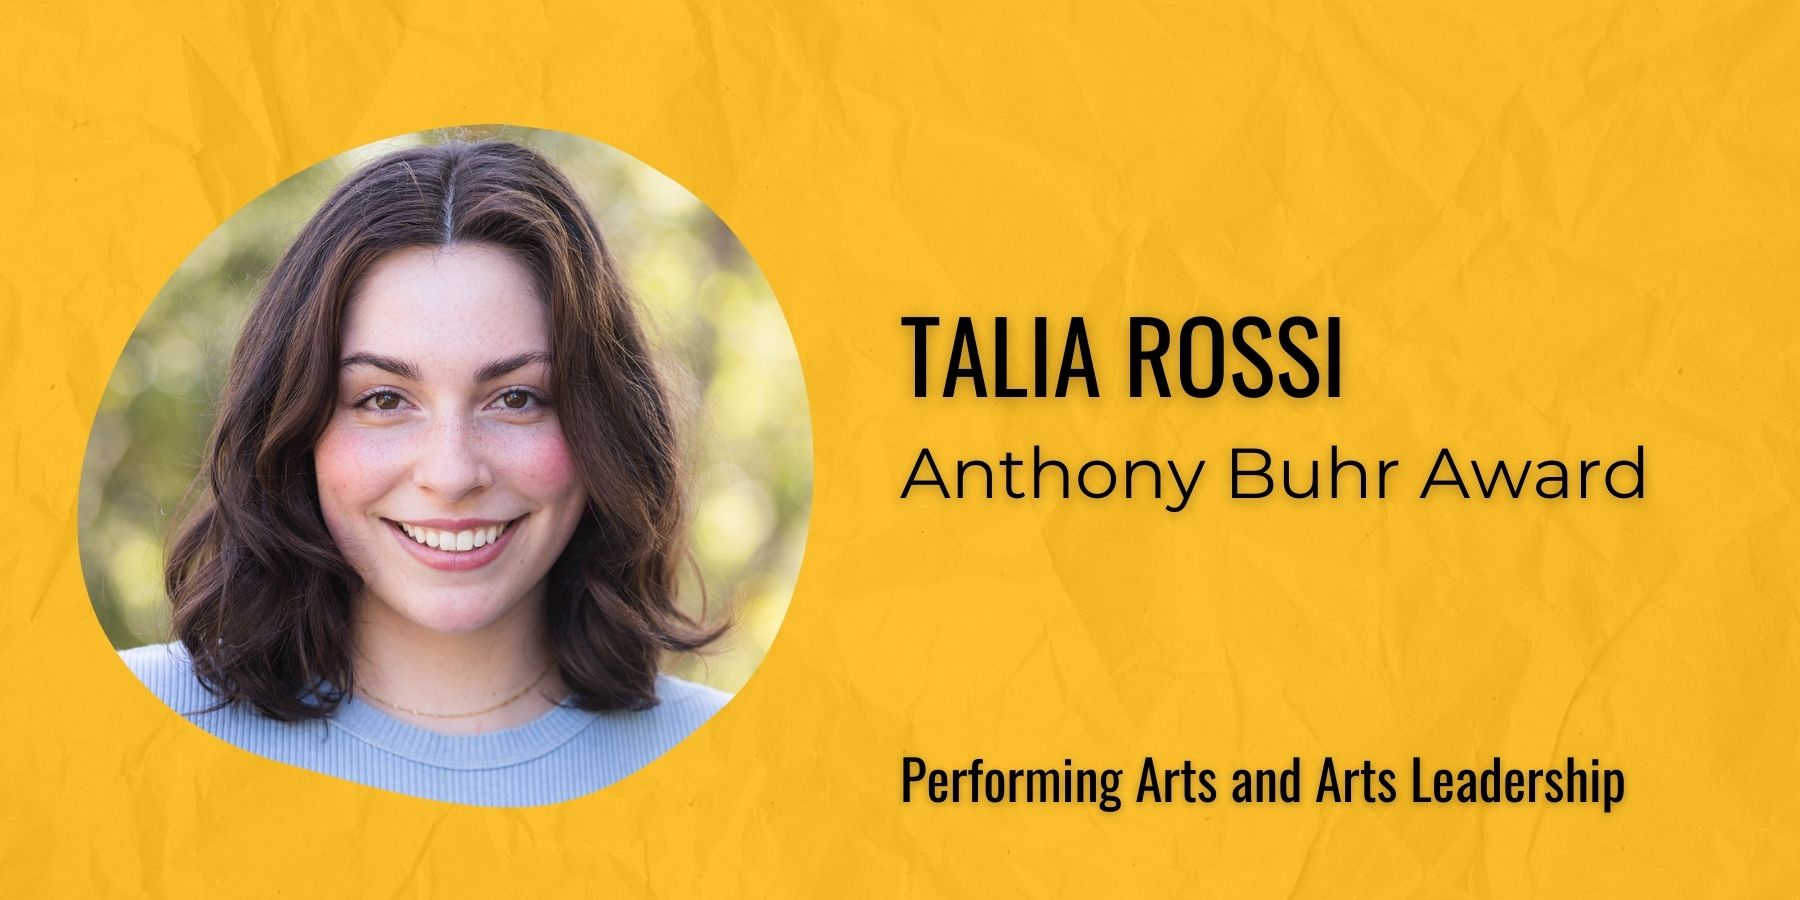 Image of Talia Rossi with text: Anthony Buhr Award, Performing Arts and Arts Leadership
